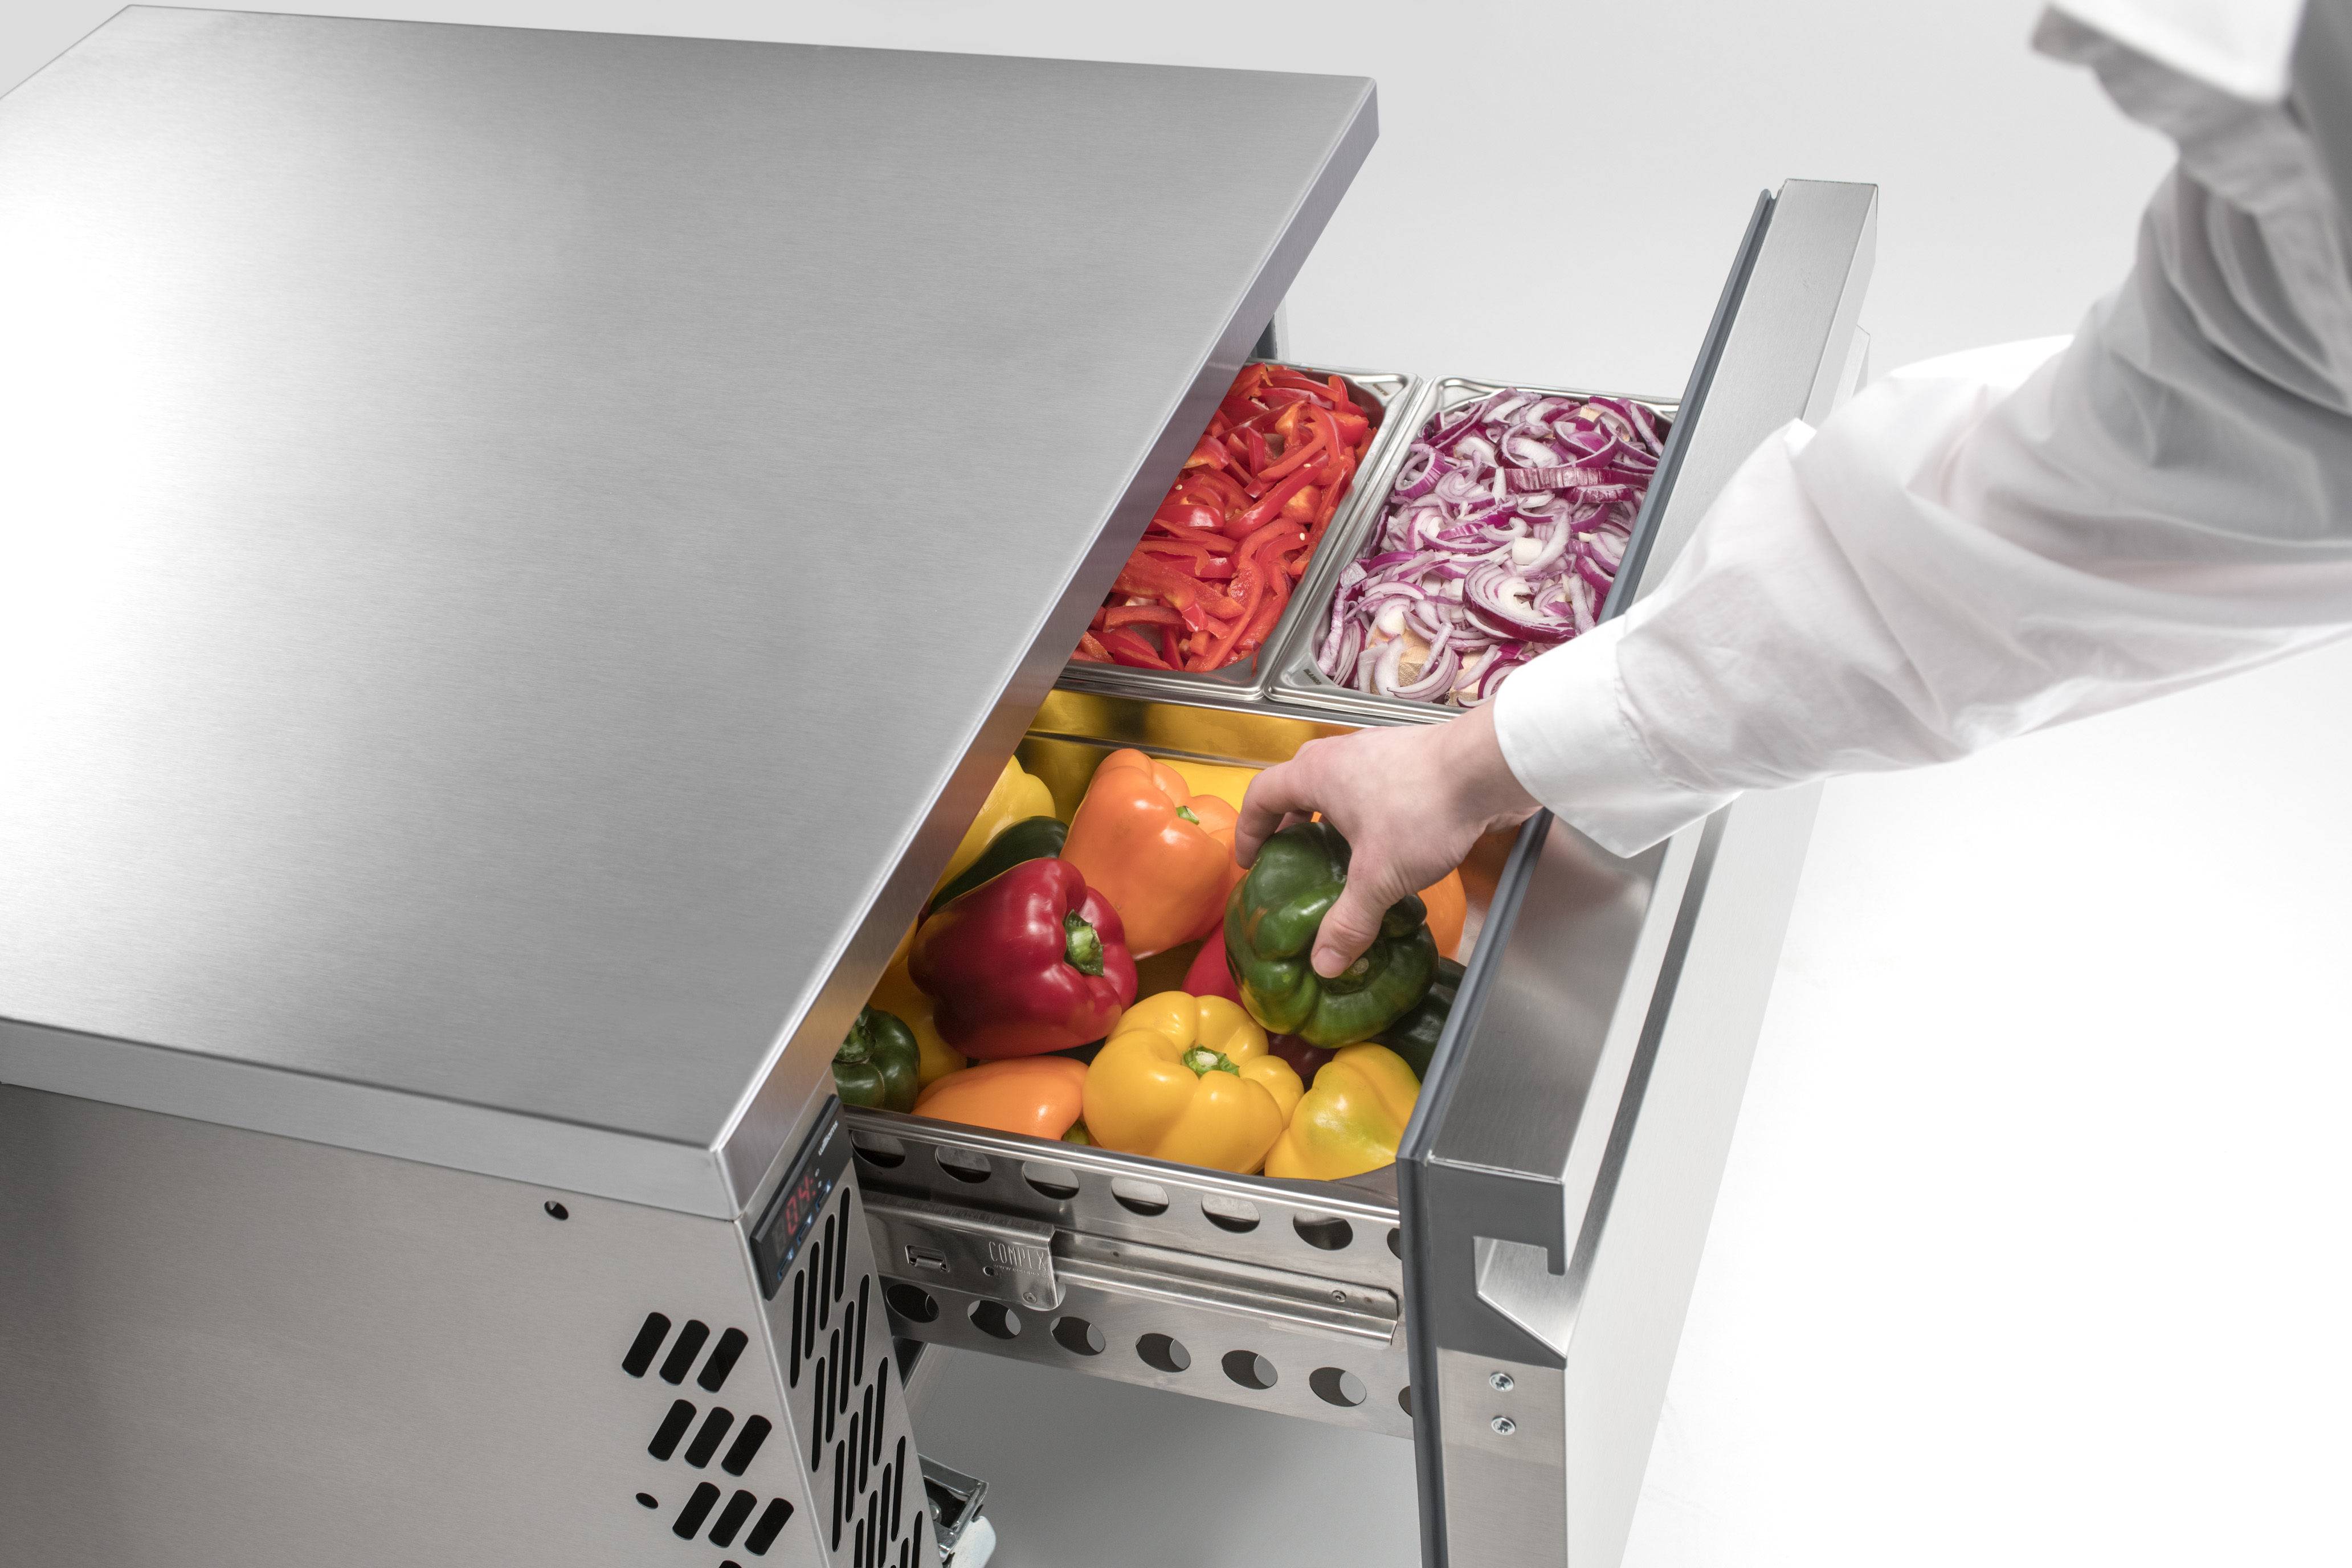 Williams Refrigeration: the practical cool for school